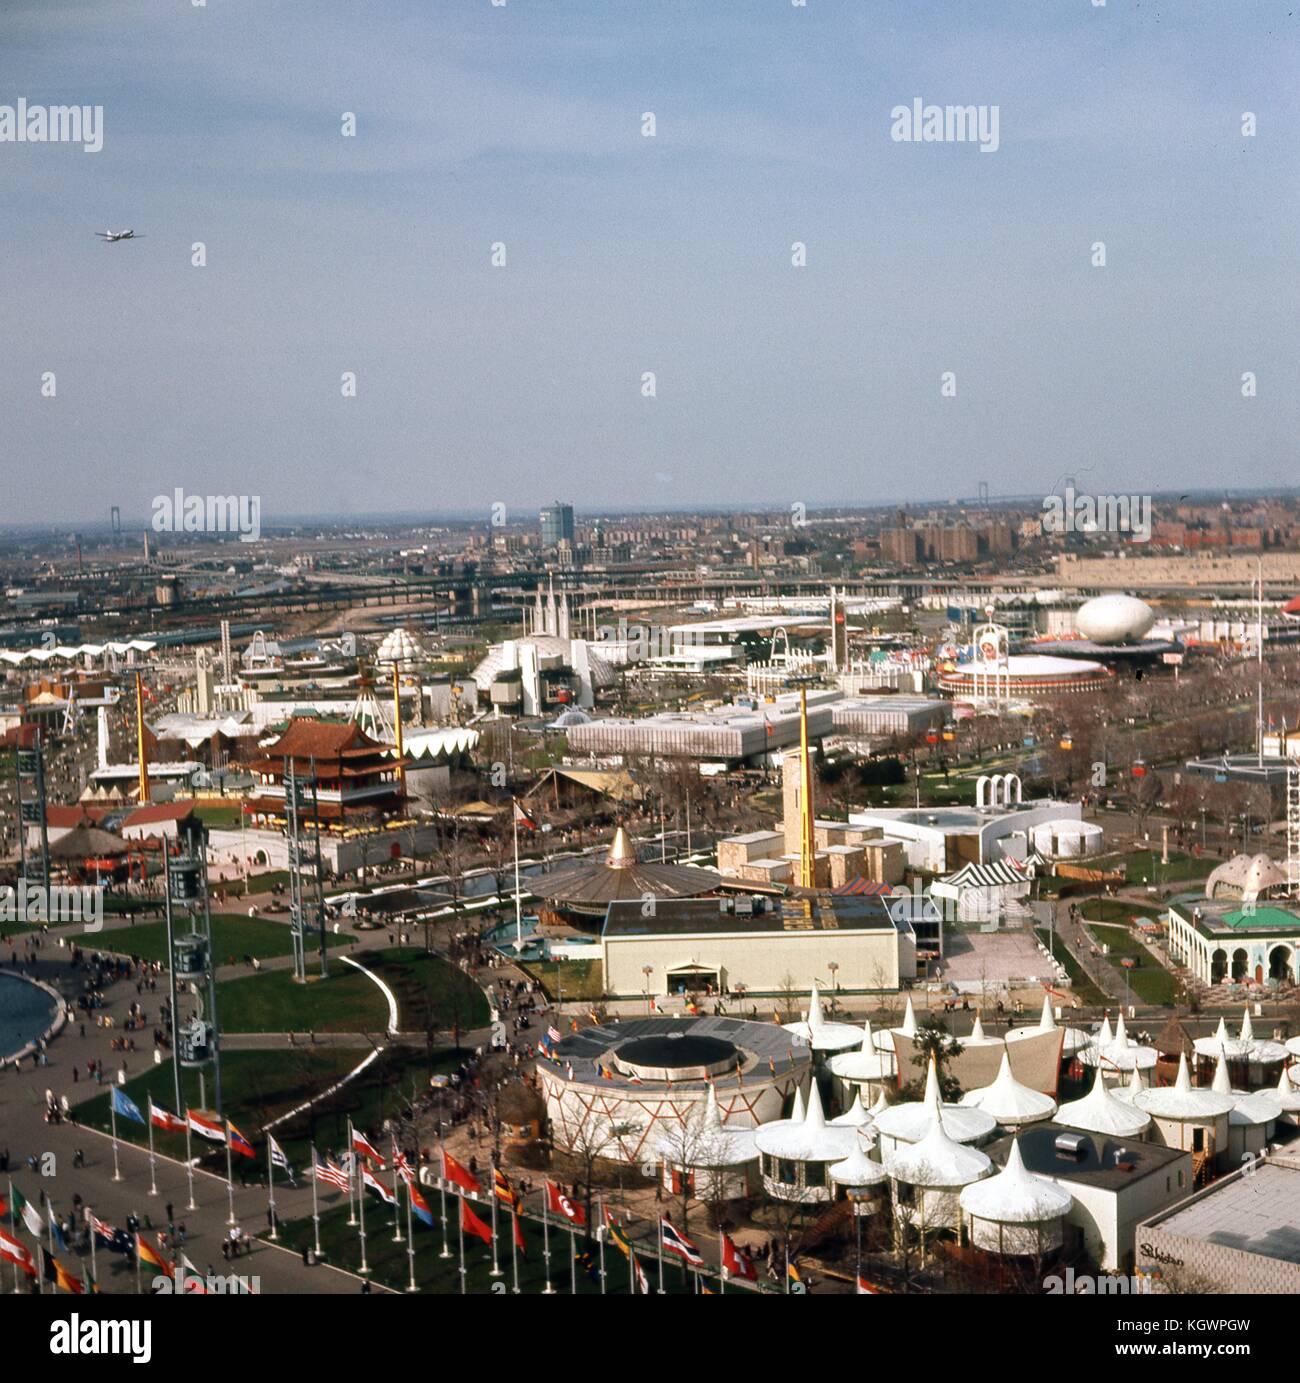 Panoramic view facing northeast of the New York World's Fair, taken from the observation tower at the New York State Pavilion, in Flushing Meadows-Corona, Queens, New York, May, 1965. At upper left corner is an airplane taking off from LaGuardia Airport along Flushing Bay. The Whitestone and Throgs Neck Bridges spanning the Long Island Sound are seen from left to right in the extreme distance. In the midground are a multitude of fair exhibits located on either side of the Promenade: the Spain Pavilion; the 7-Up and Dupont exhibits next to the famed IBM egg; the national pavilions of the Philip Stock Photo